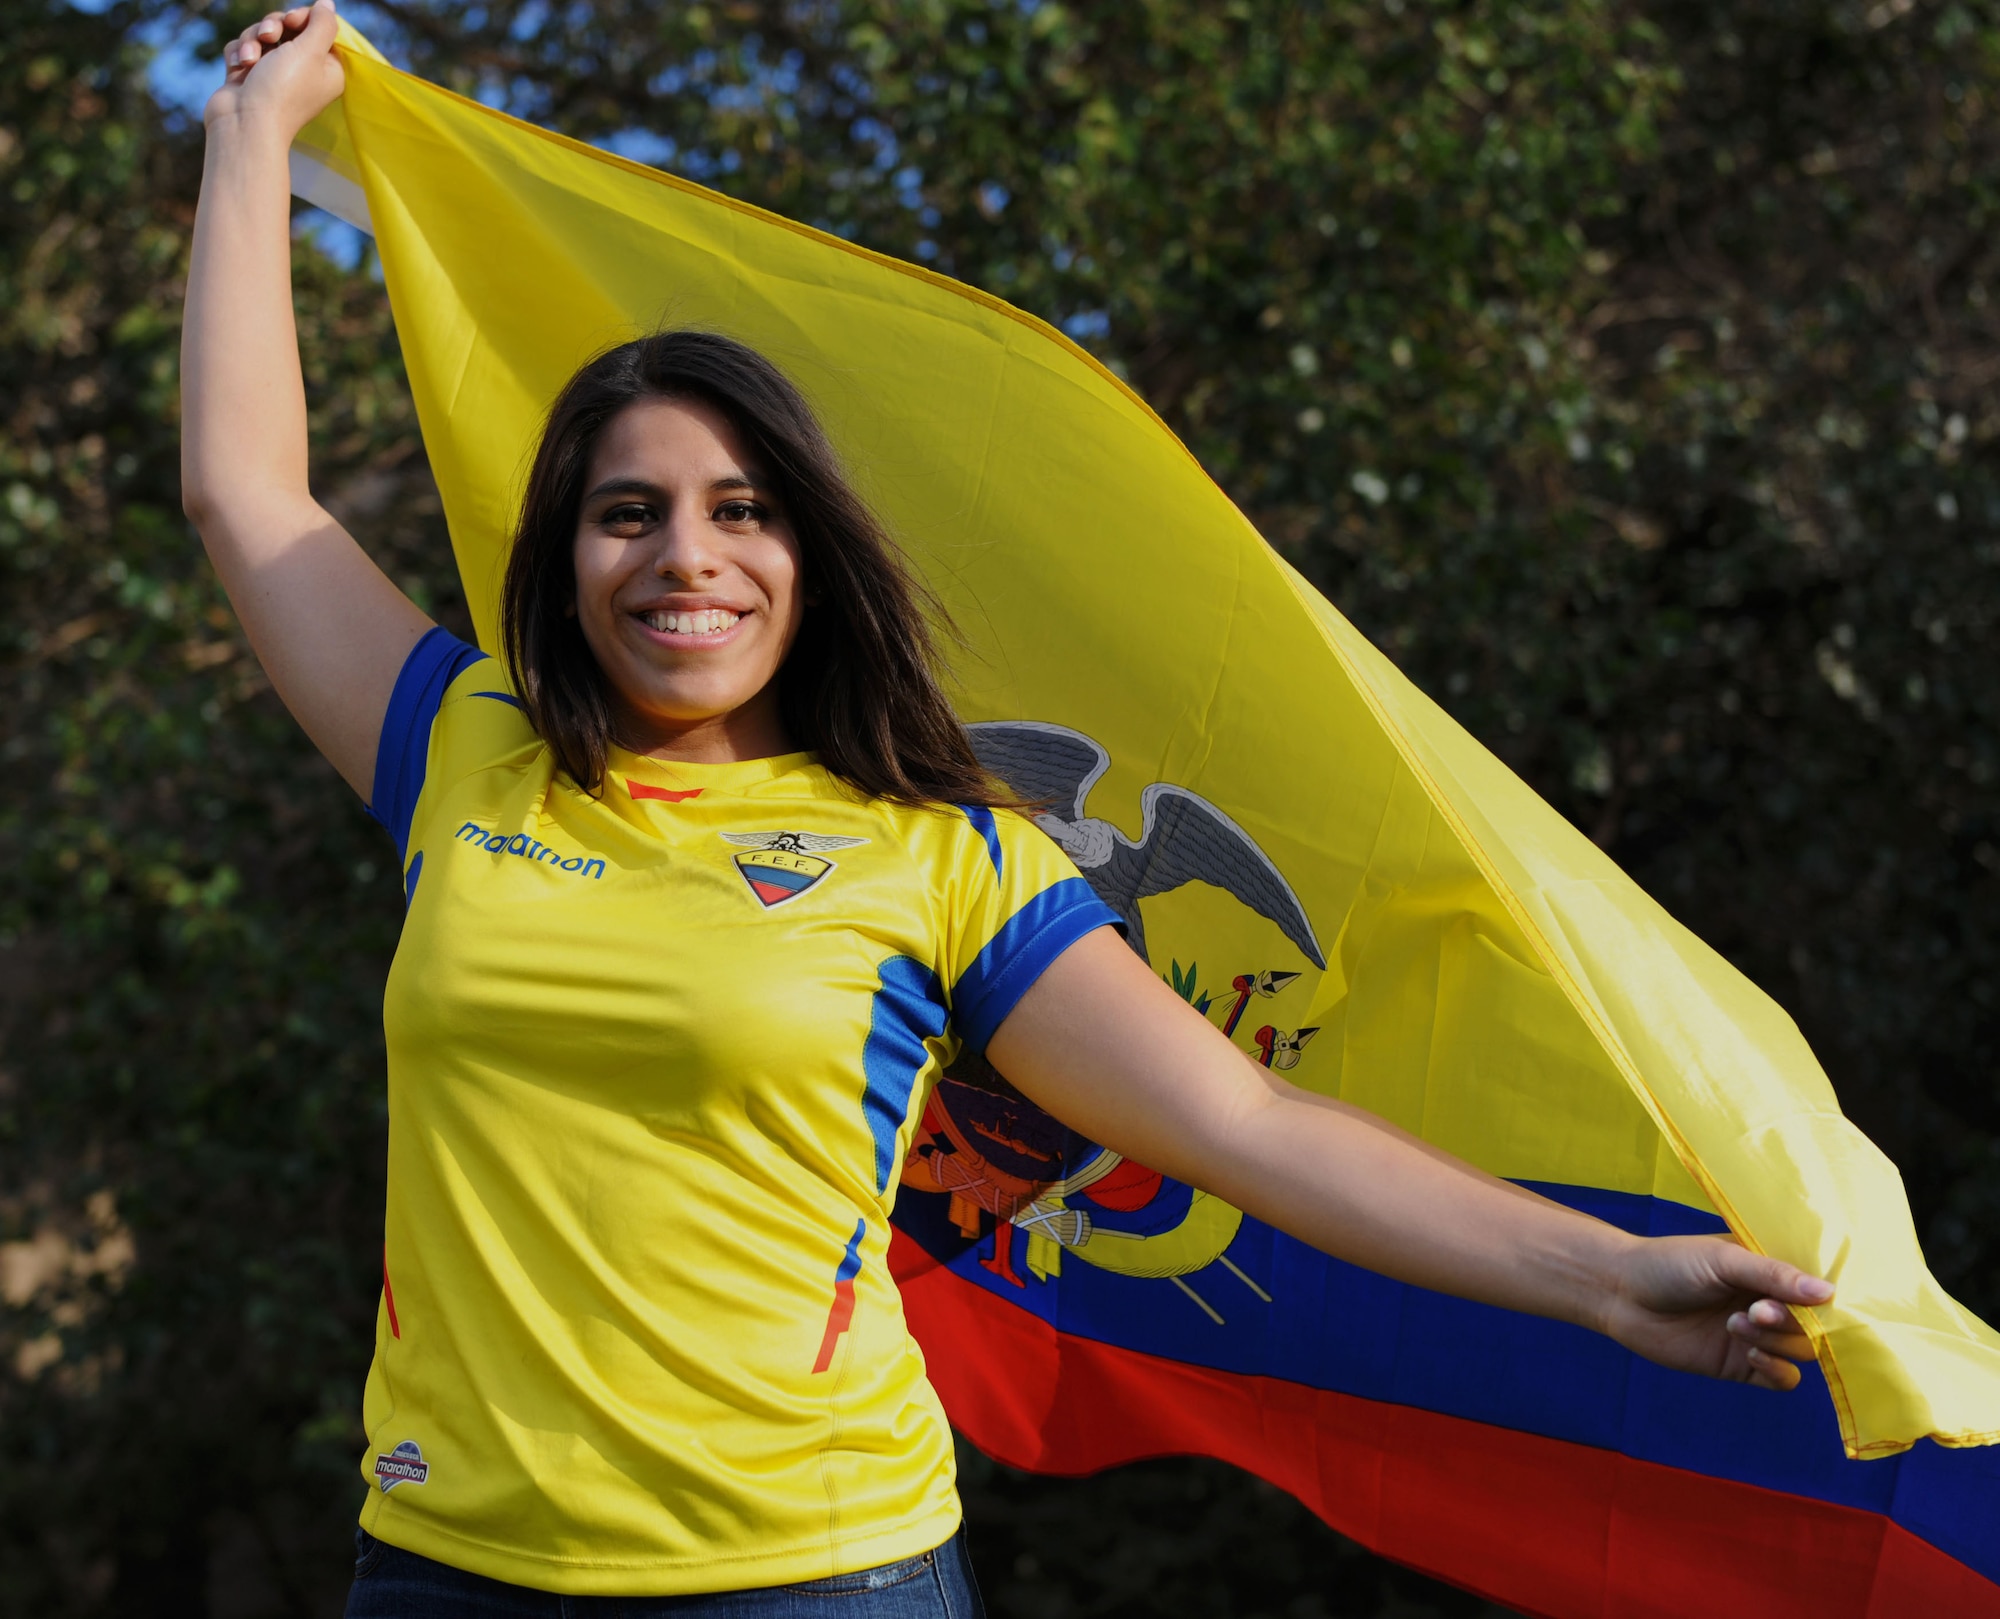 Airman Allison Campoverde, 22nd Medical Support Squadron medical records technician, poses with an Ecuadorian flag, Sept. 13, 2014, at McConnell Air Force Base, Kan. Campoverde showed her support for her native country in recognition of Hispanic Heritage Month which began Sept. 15 and ends Oct. 15. (U.S. Air Force photo/Airman 1st Class Tara Fadenrecht)